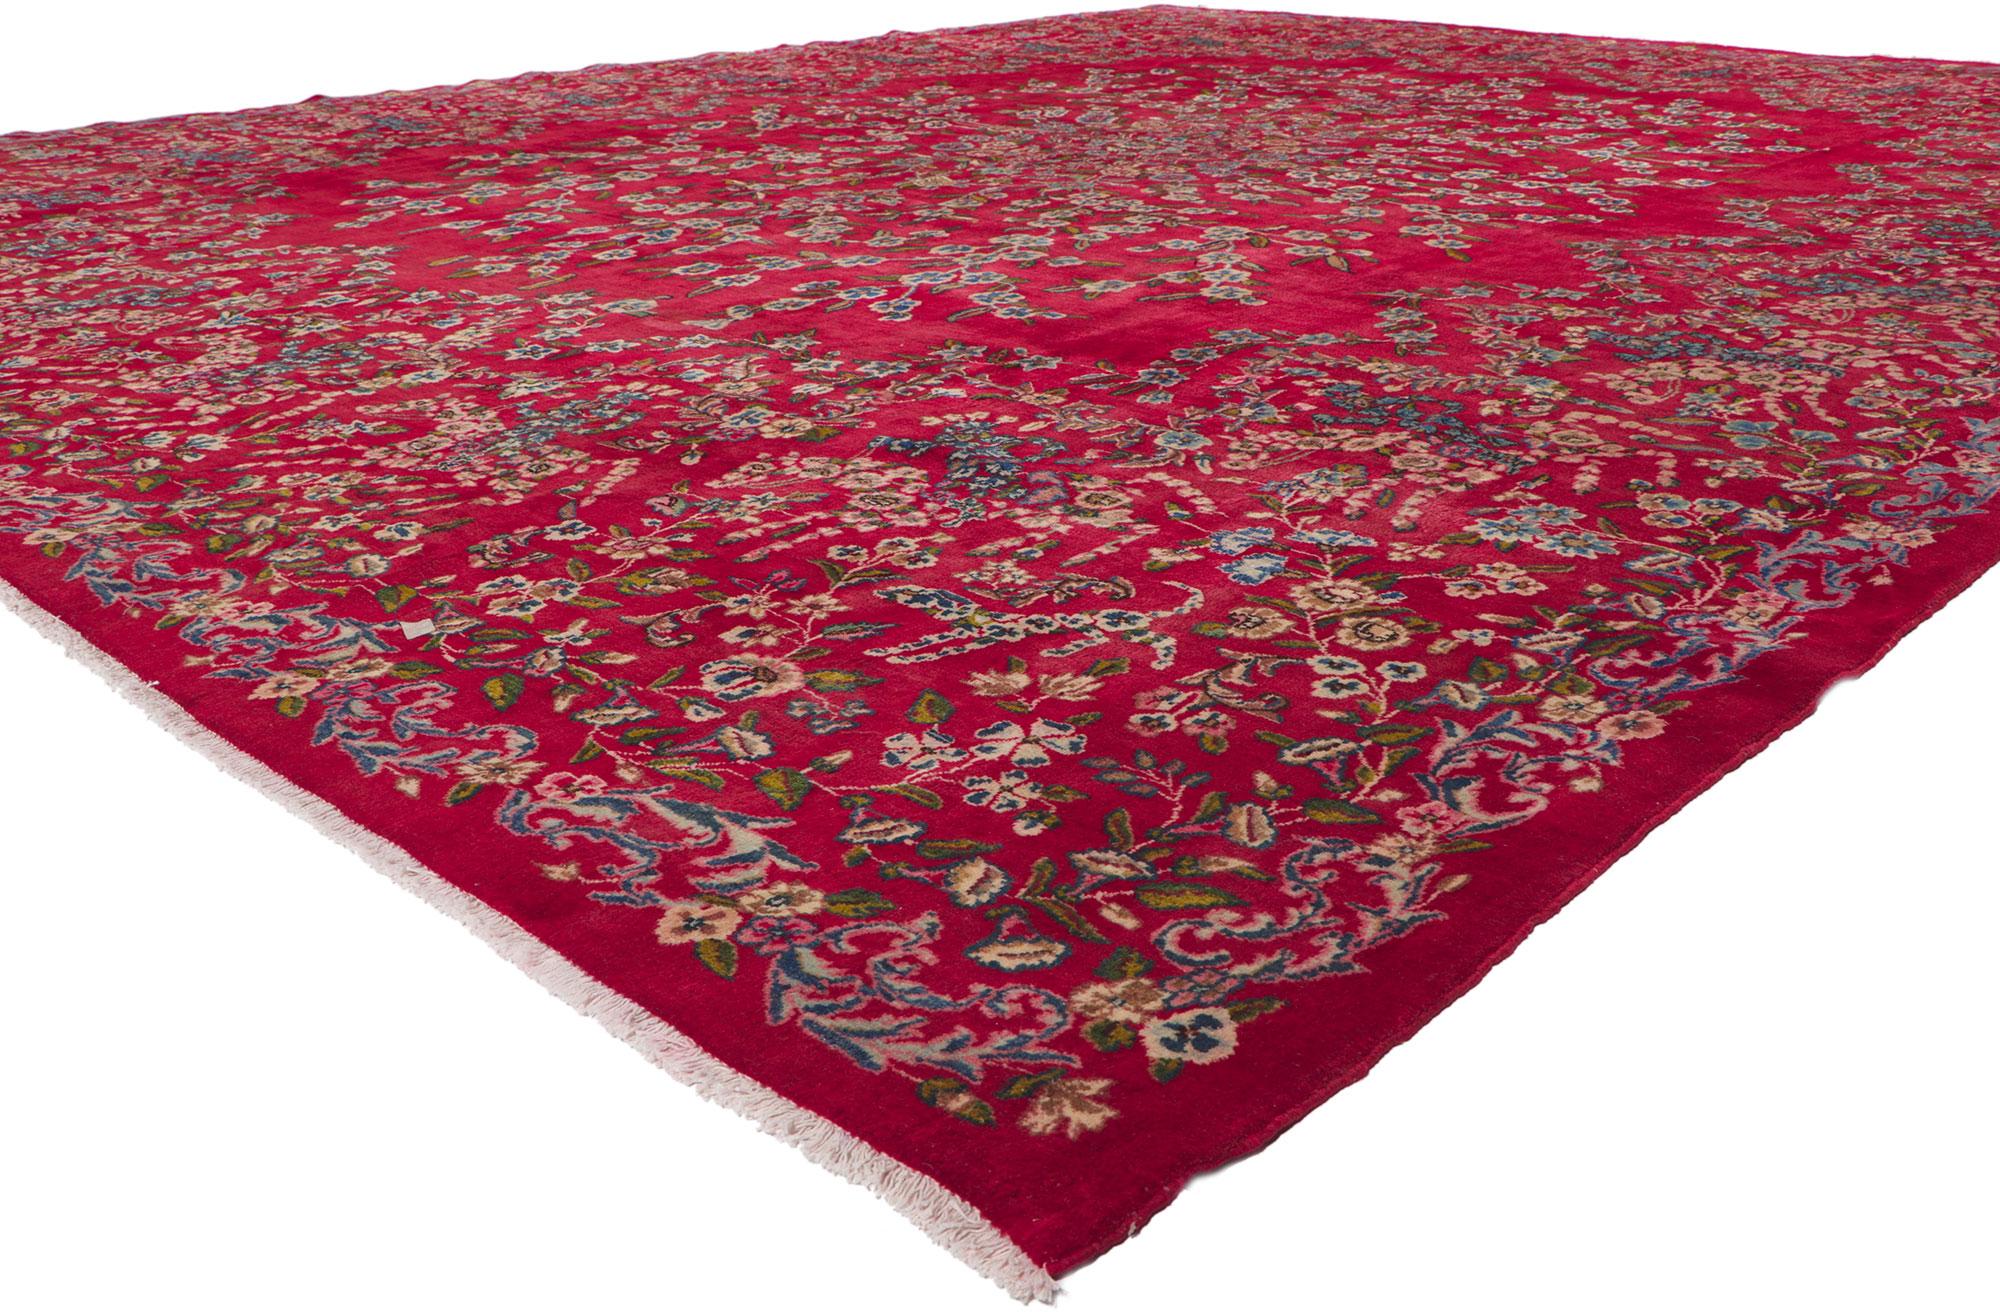 61209 Antique Red Persian Kerman Rug, 13'00 x 16'00. Imagine stepping into a world of enchantment with the allure of red Persian Kerman rugs, woven into existence in the heart of Kerman, Iran. Their rich red hues, reminiscent of passion and